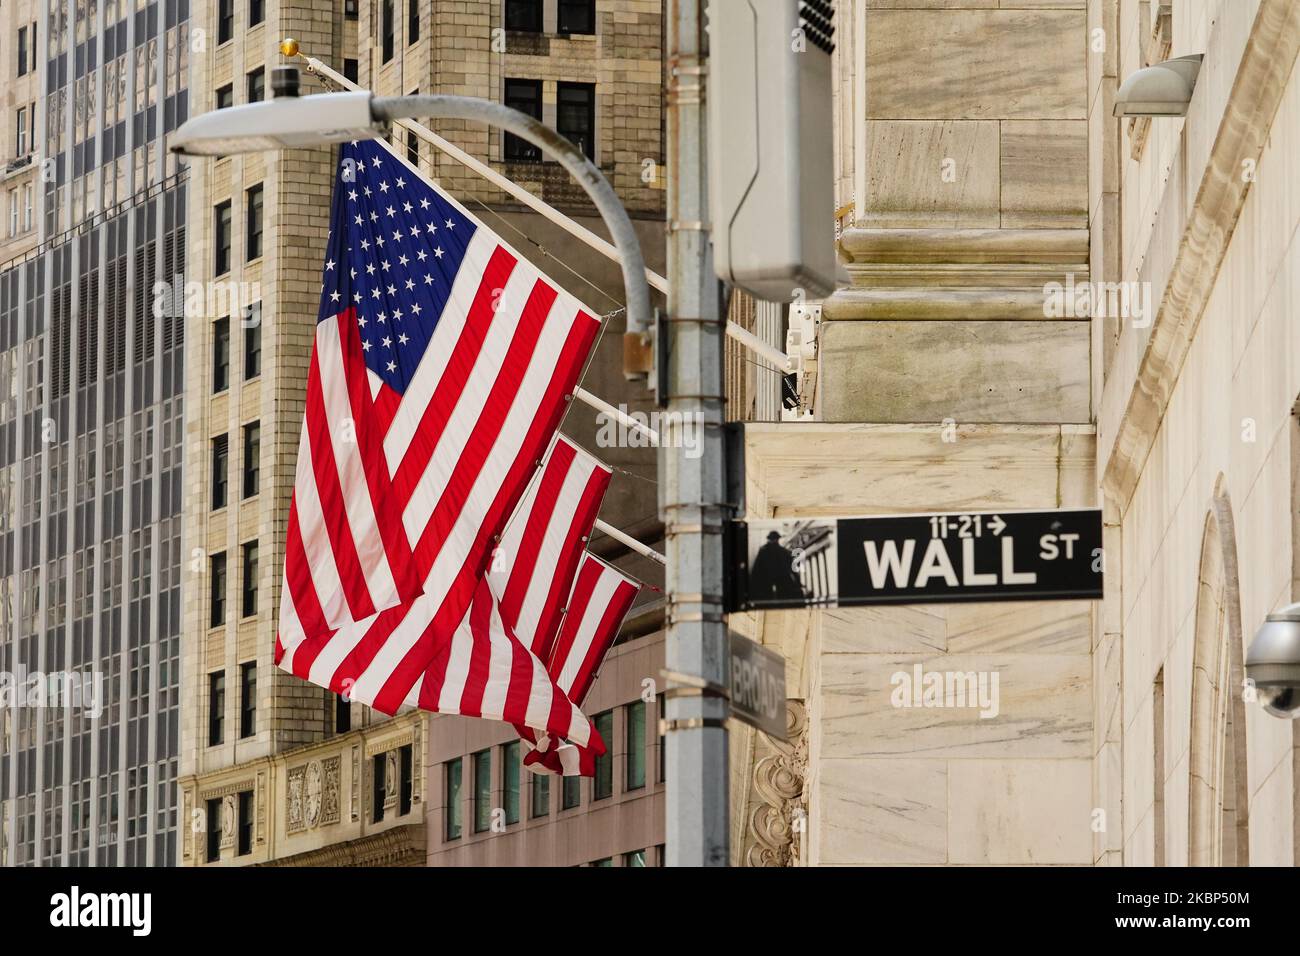 A view of american flags at New York Stock Exhange during the coronavirus pandemic on May 20, 2020 in Wall Street, New York City. COVID-19 has spread to most countries around the world, claiming over 316,000 lives with over 4.8 million infections reported. (Market Watch)— Dow, S&P 500 weakness belie positive NYSE market breadth. (Photo by John Nacion/NurPhoto) Stock Photo